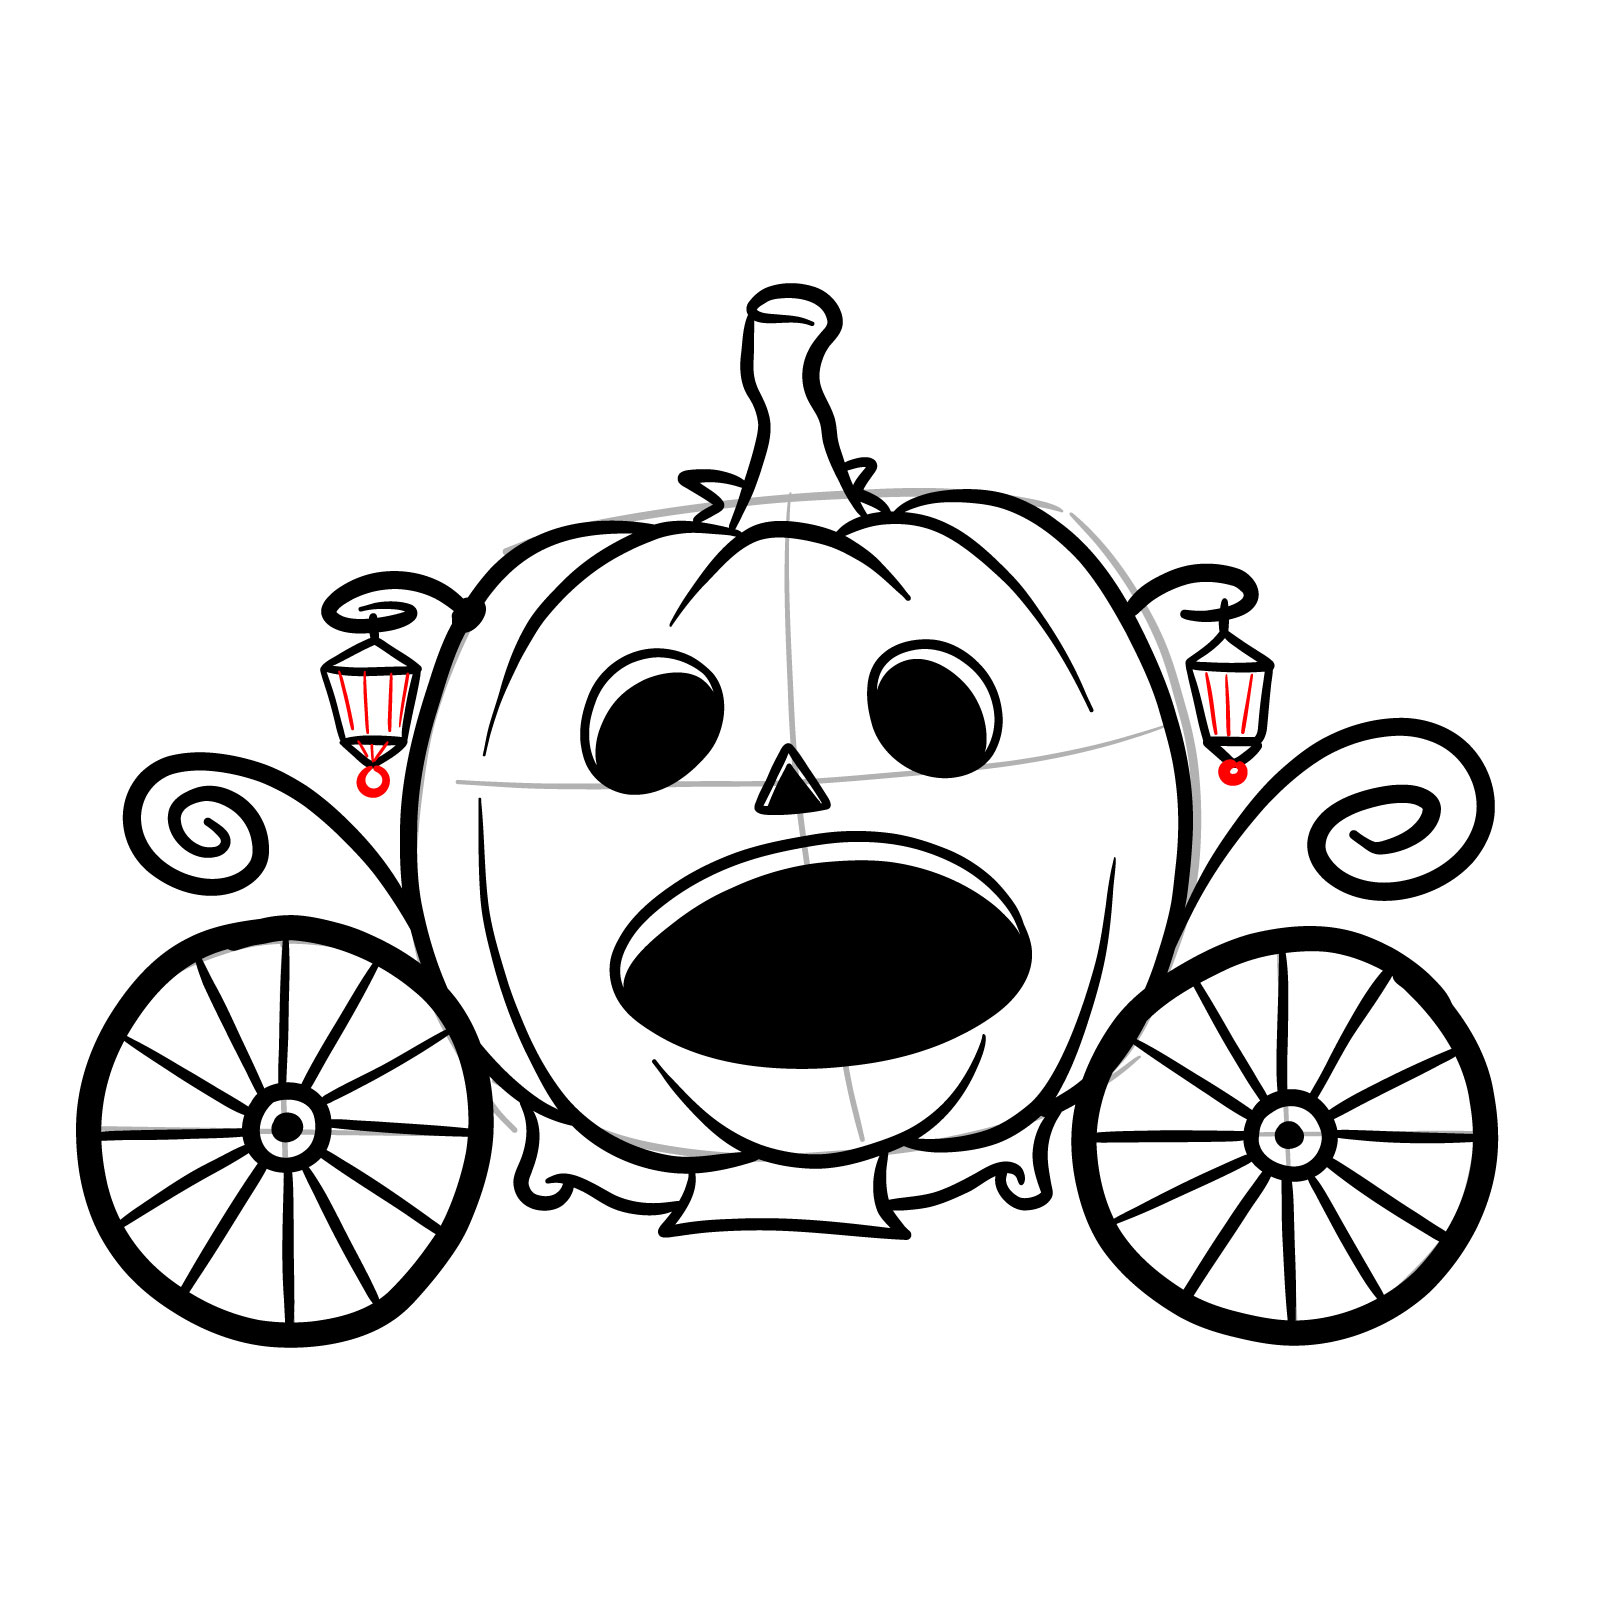 How to draw a Pumpkin Carriage - step 17